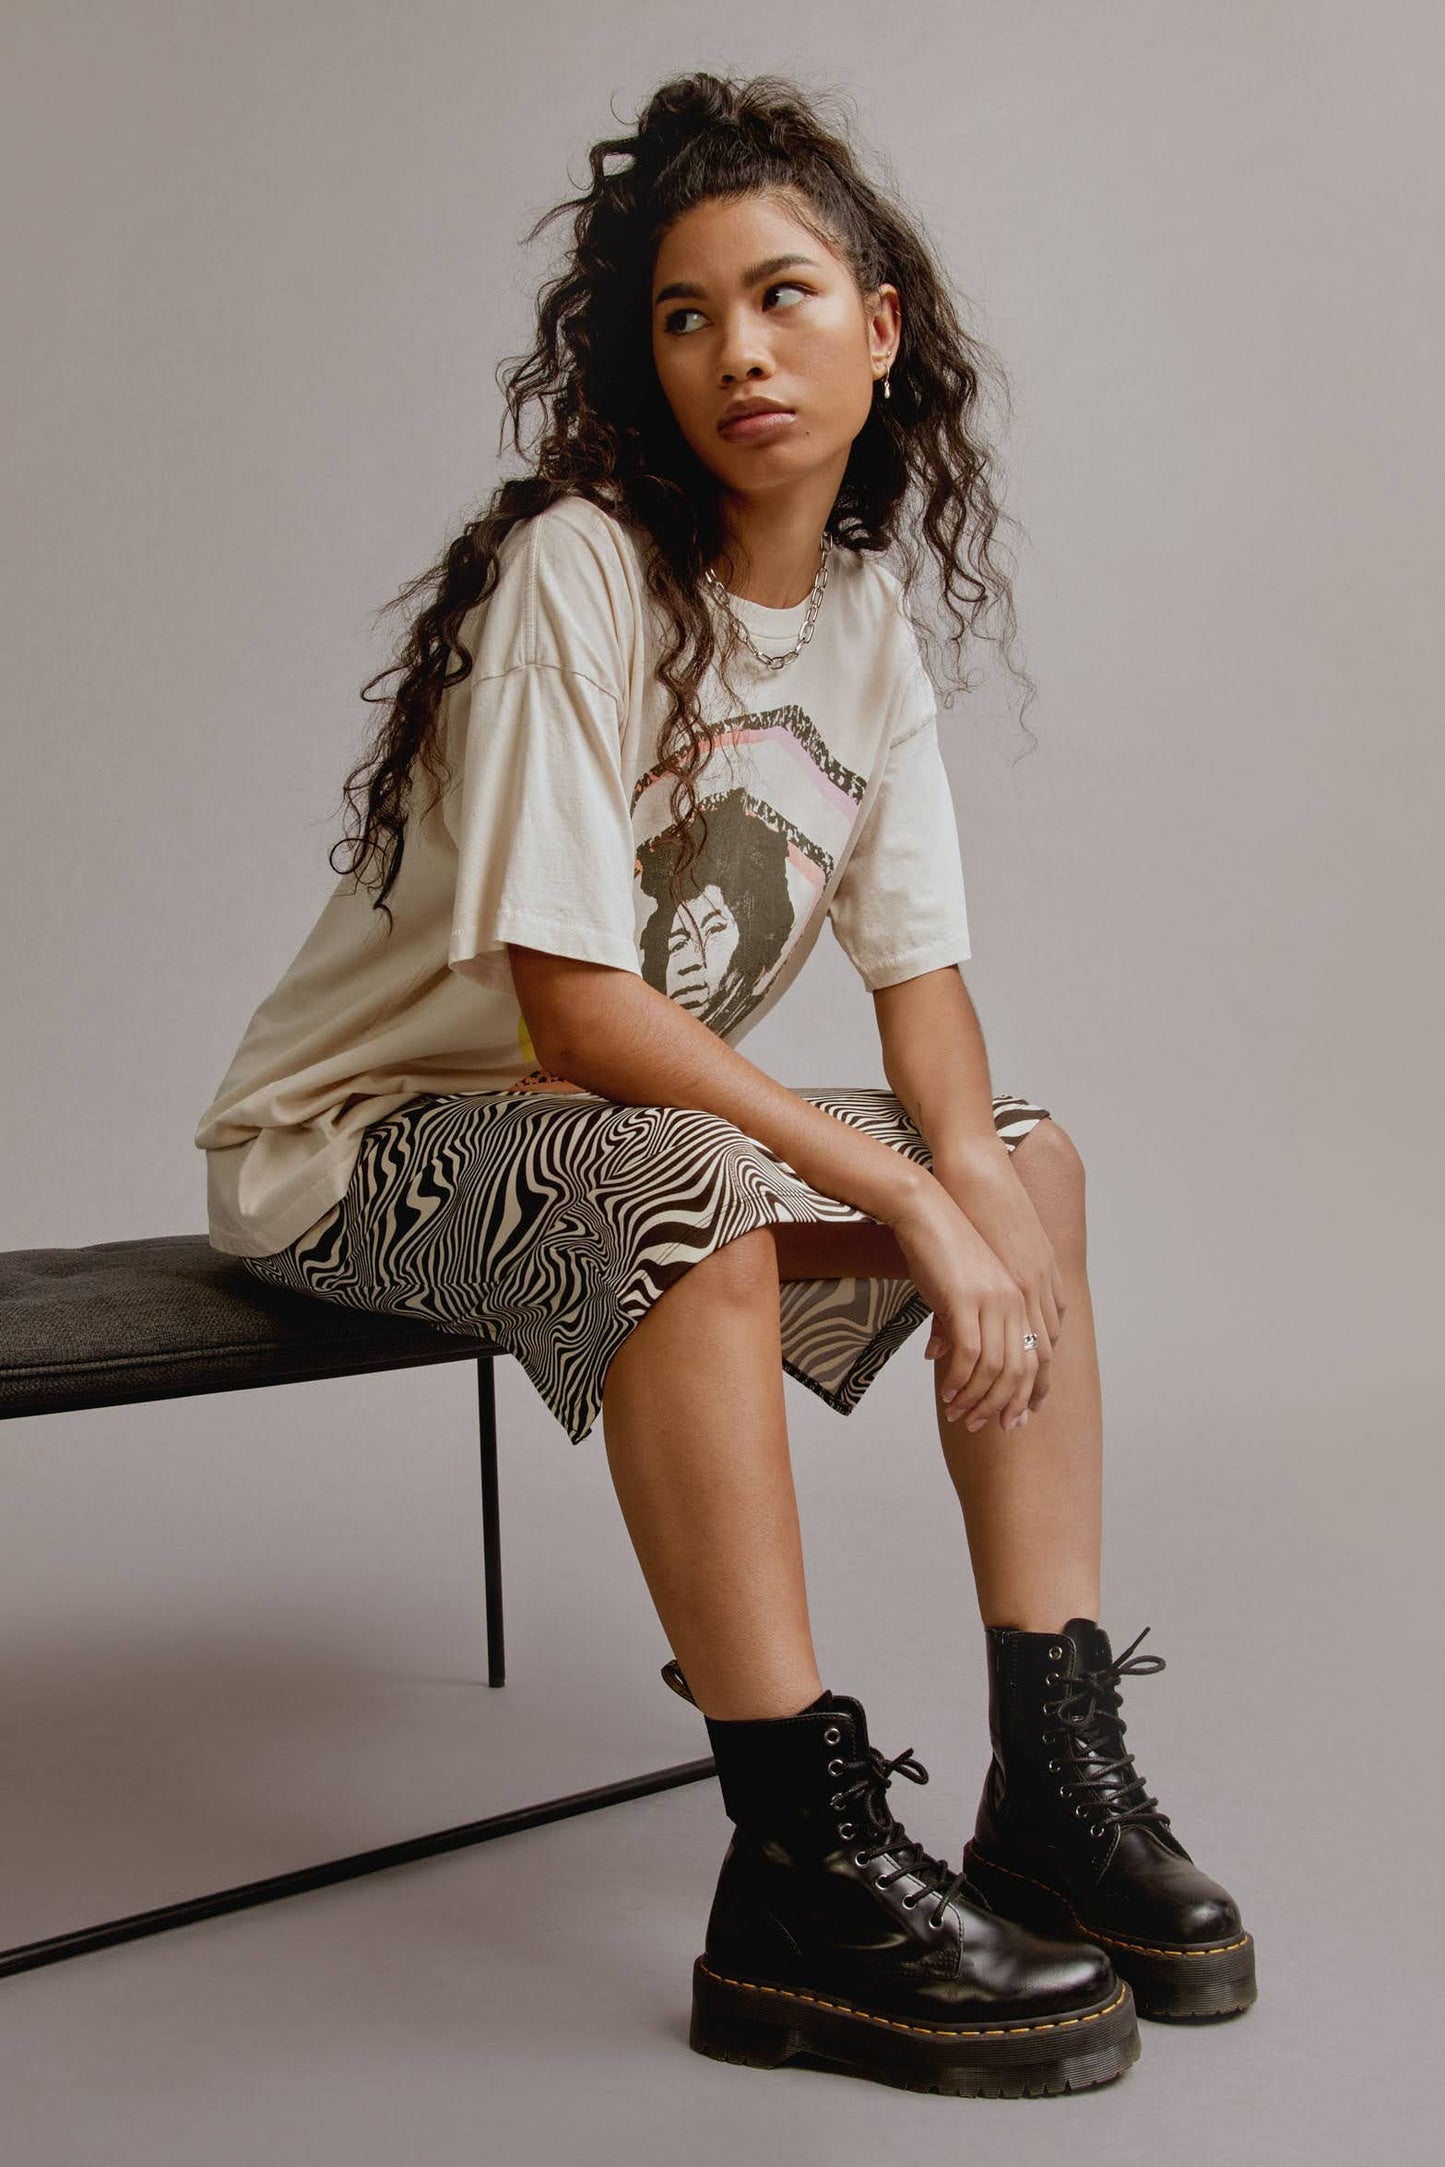 Dark curly-haired model featuring a dirty white tee designed with a multi-colored spiral with the icon’s portrait and name in hand-drawn letters